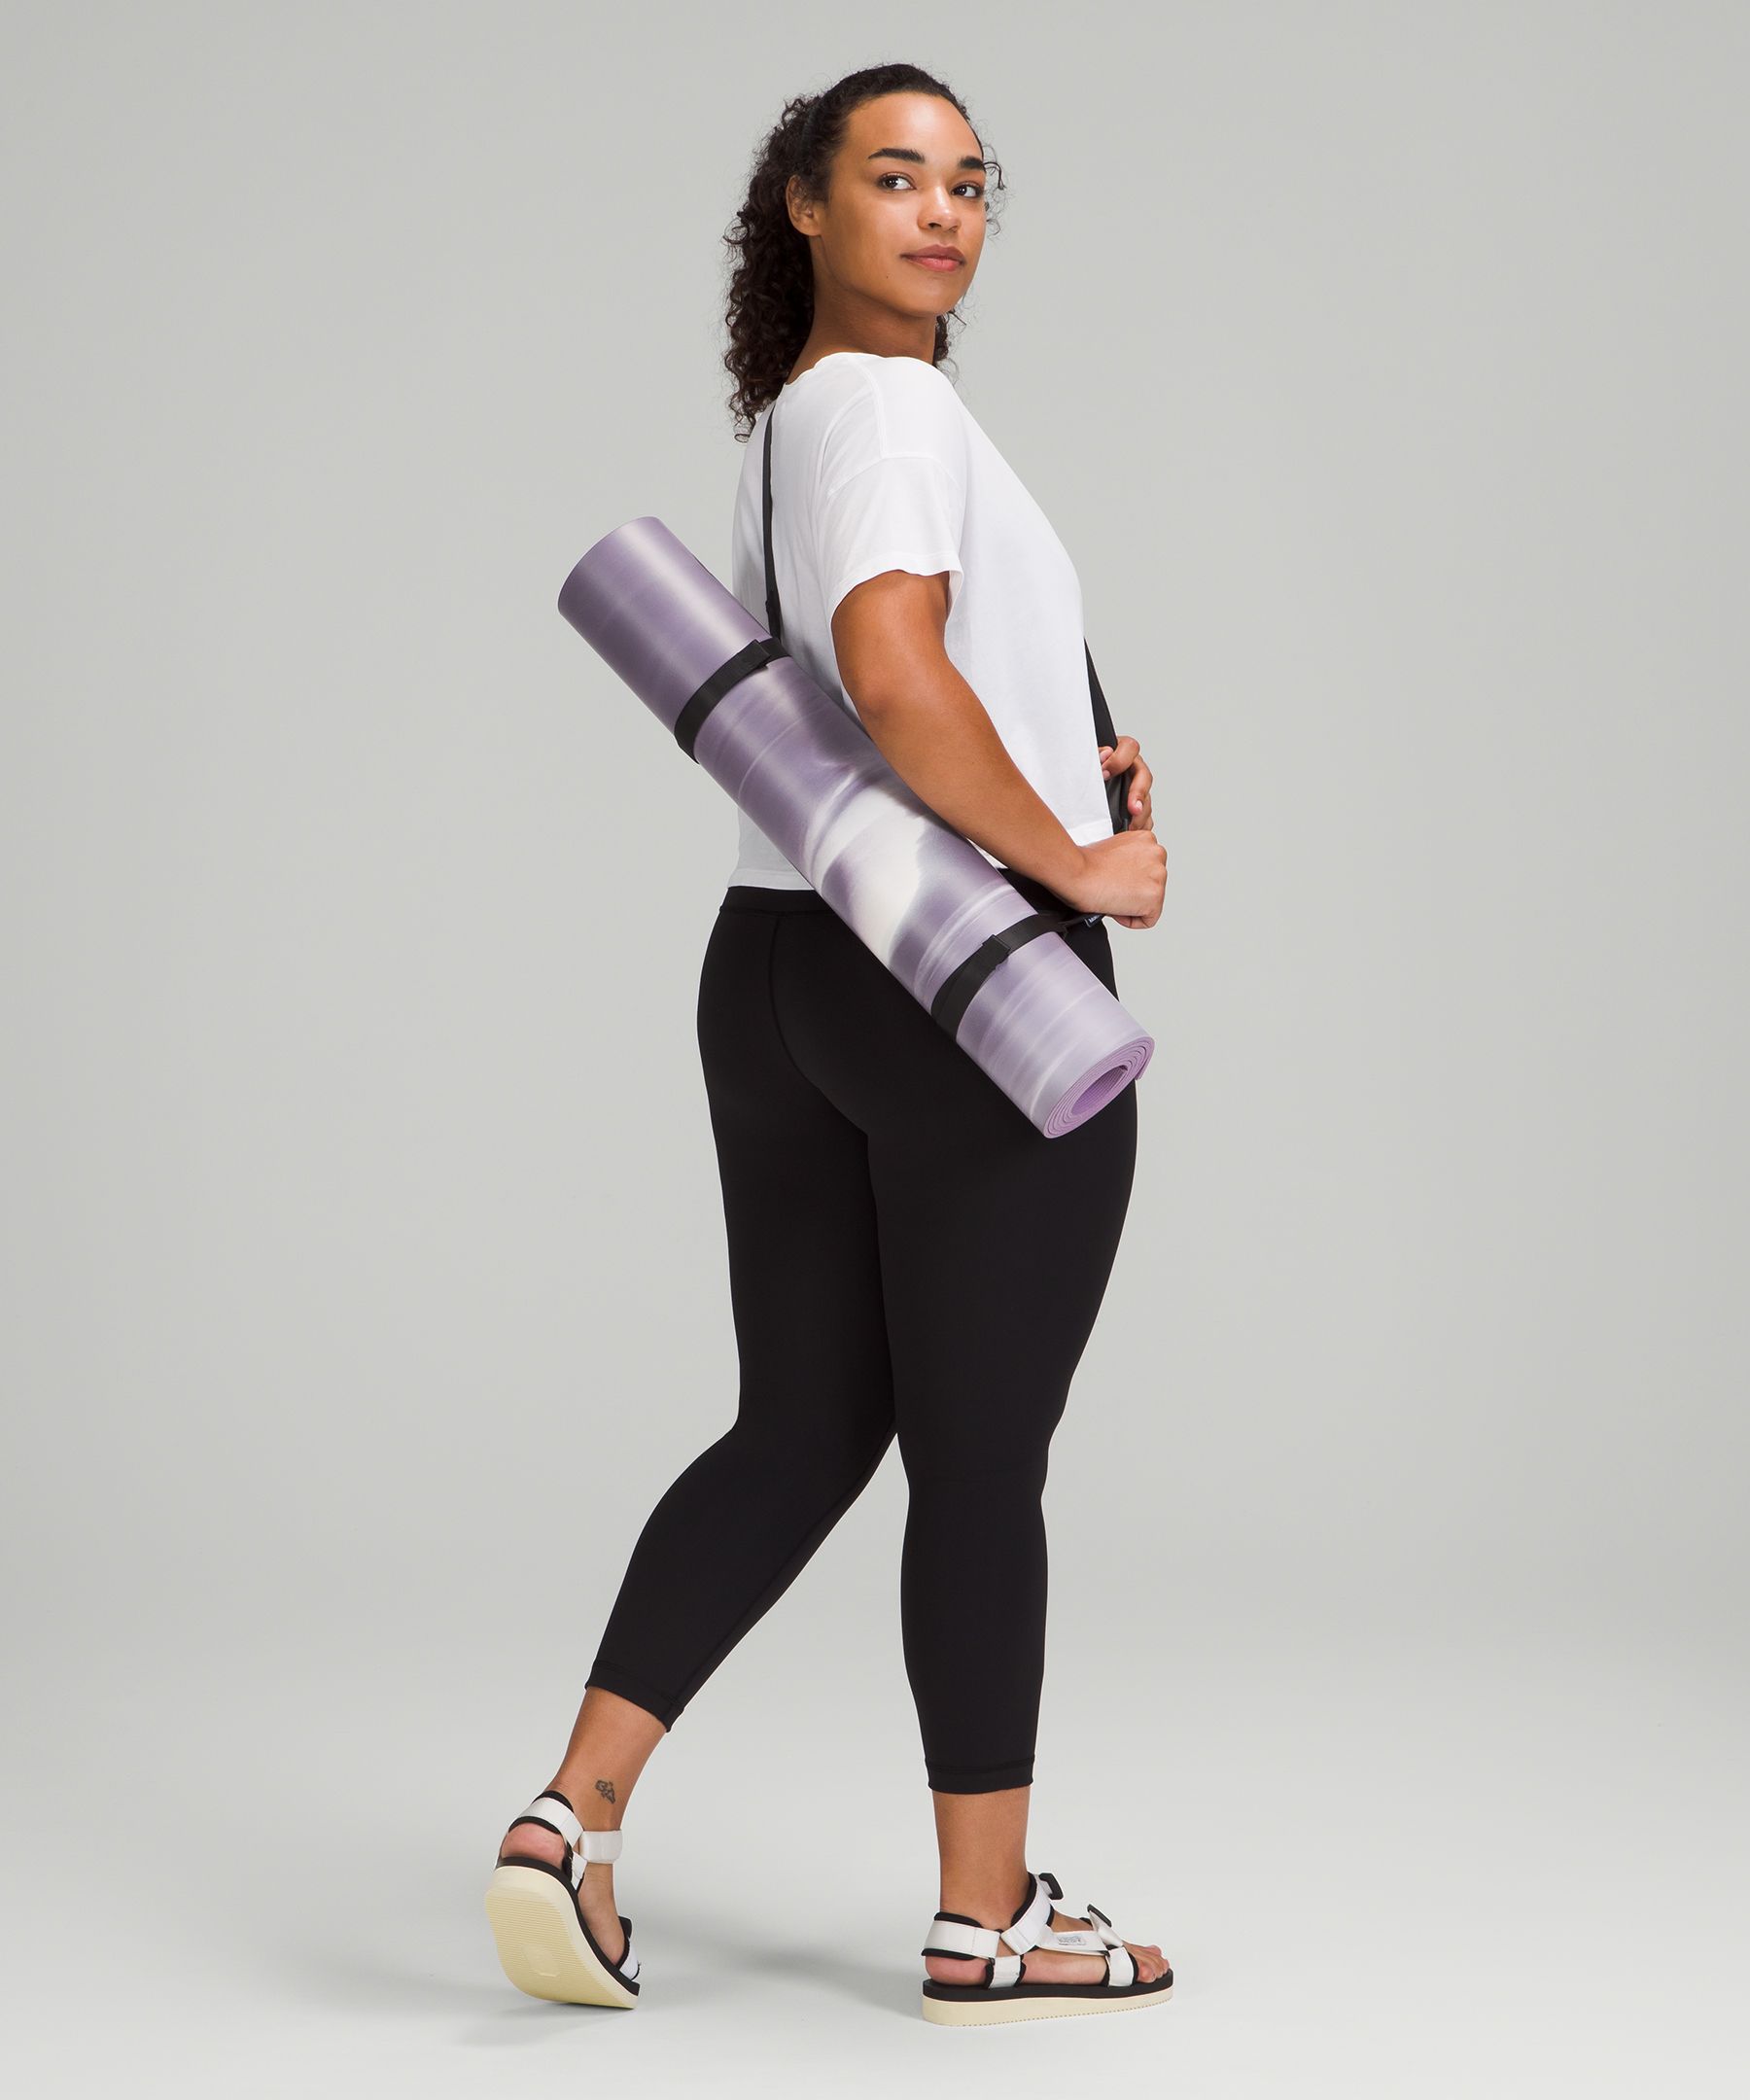 First lulu yoga mat & never going back! Loving color matching mat strap/pouch  combos. ❤️ : r/lululemon